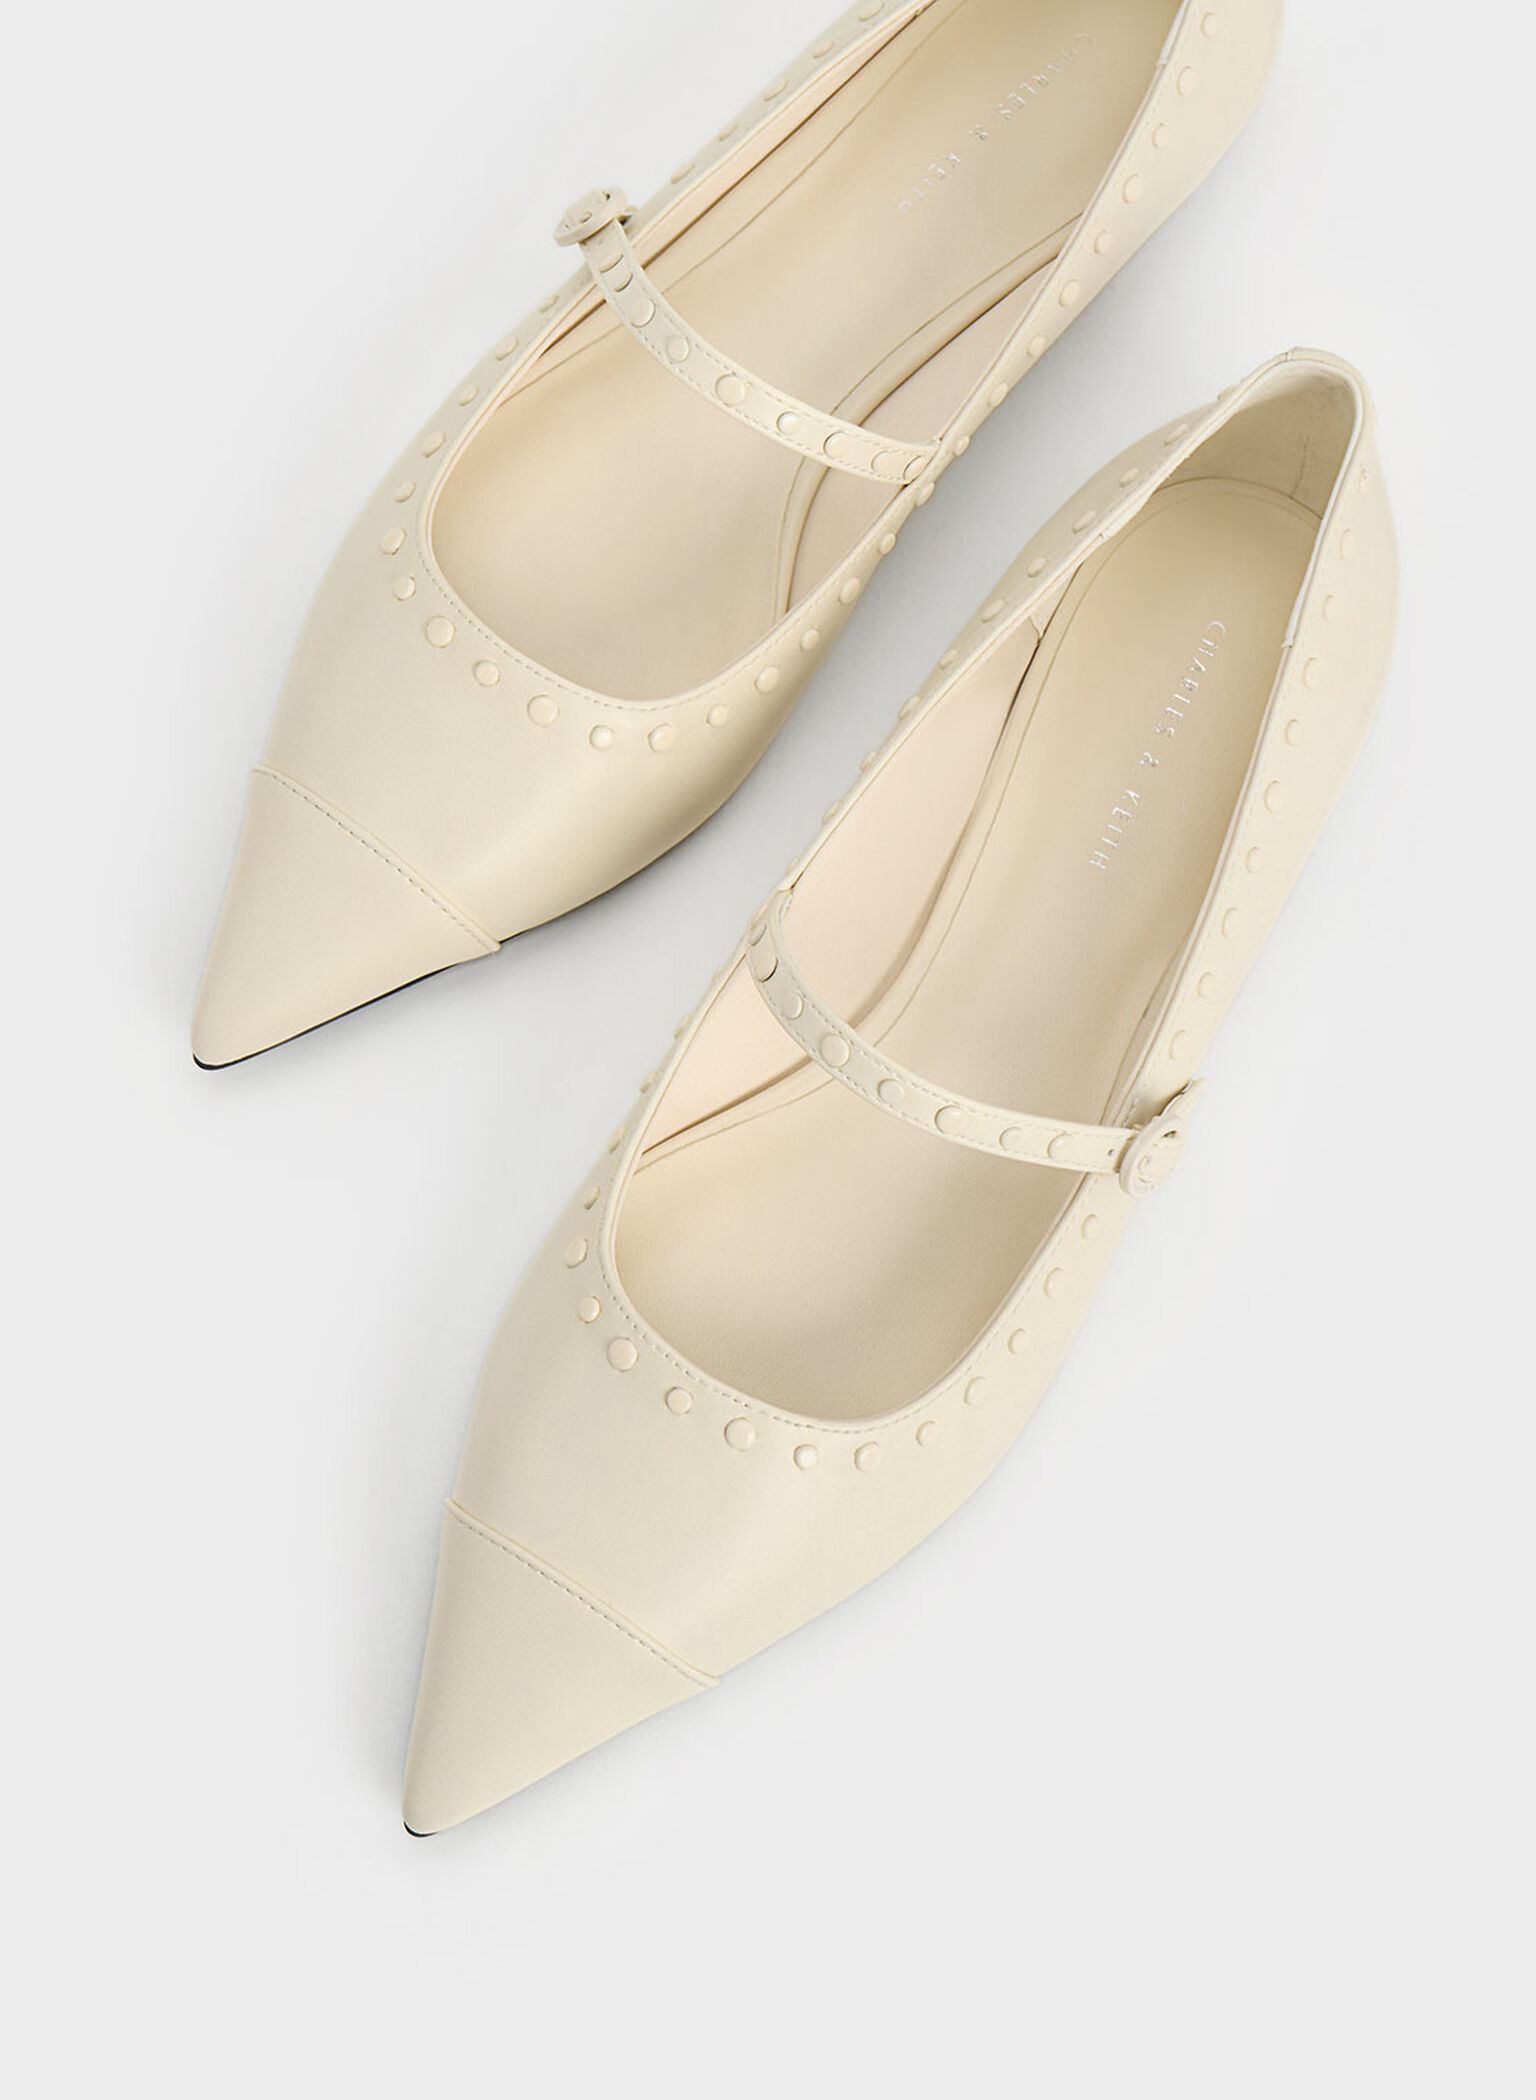 Studded Pointed-Toe Mary Jane Flats, Chalk, hi-res